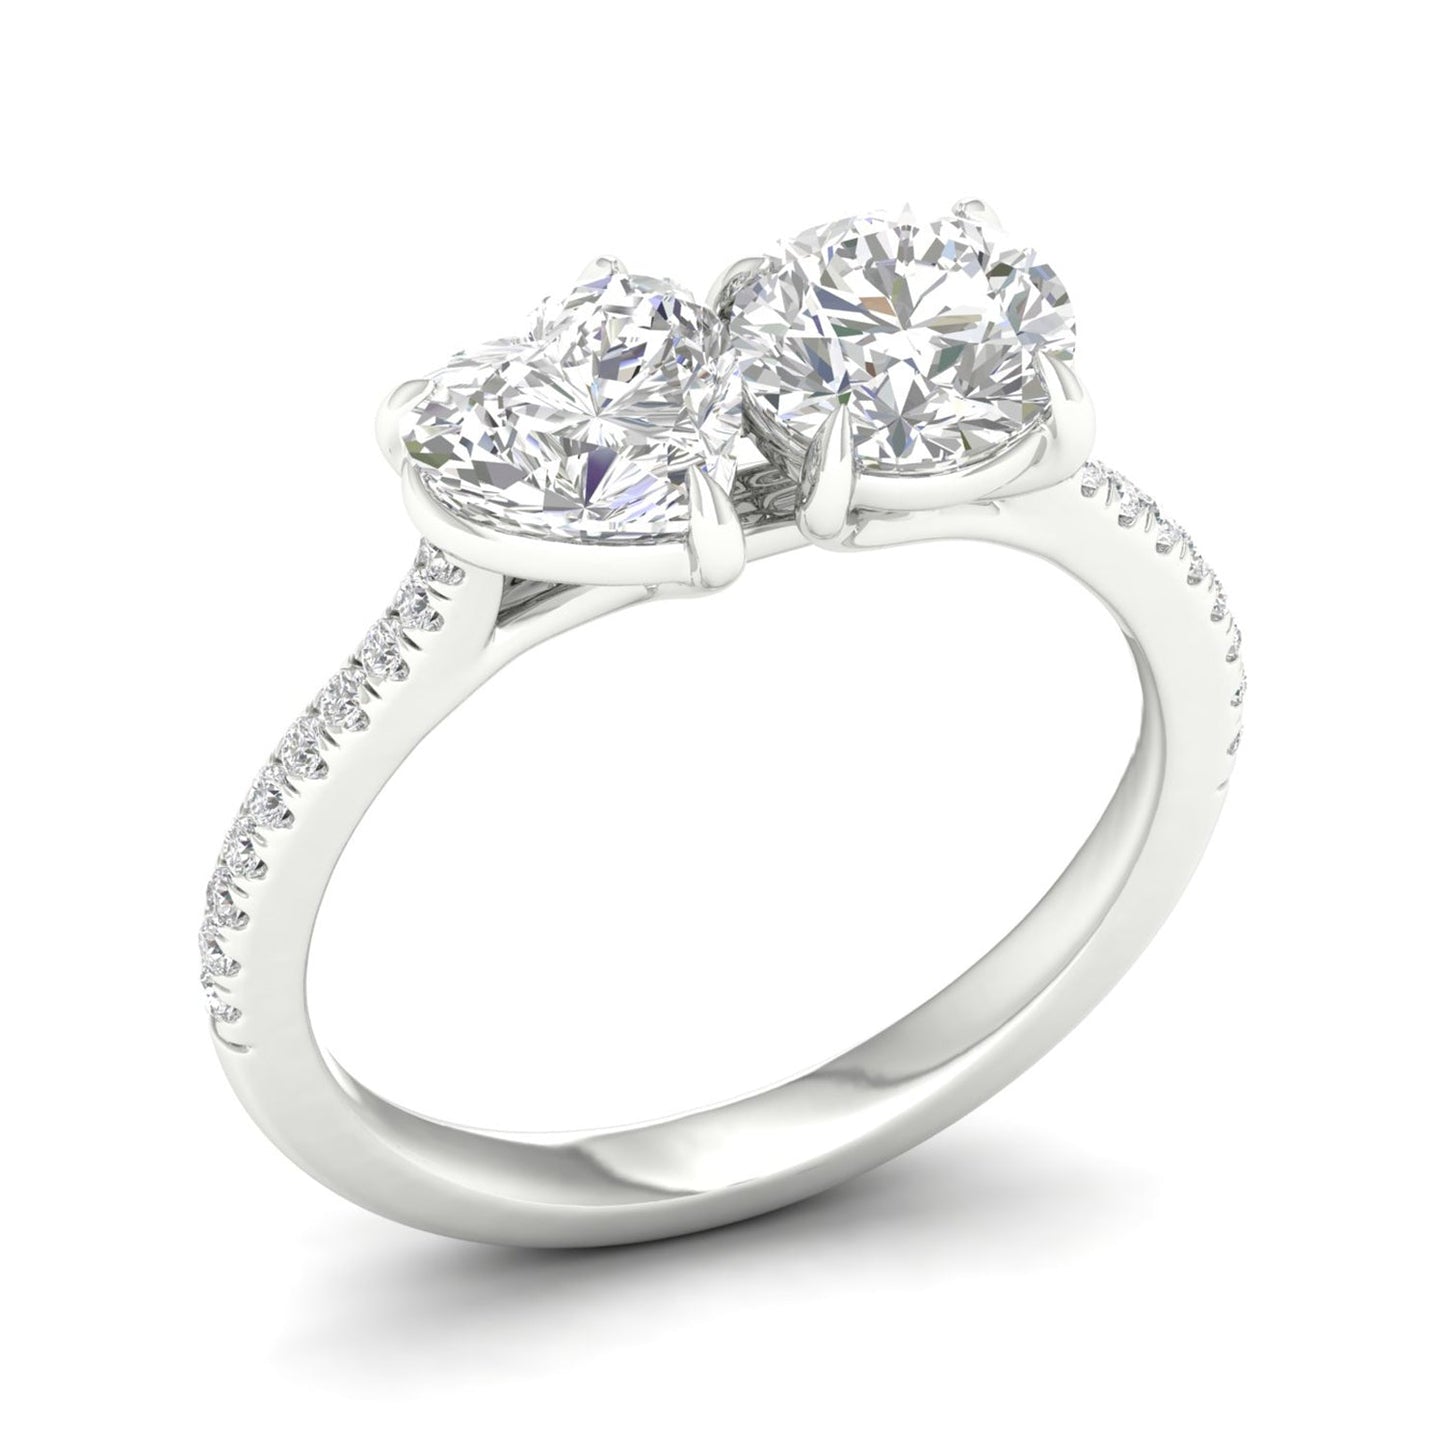 Atmos Heart Round Two Stone Diamond Ring_Product Angle_2 1/6 Ct. - 2